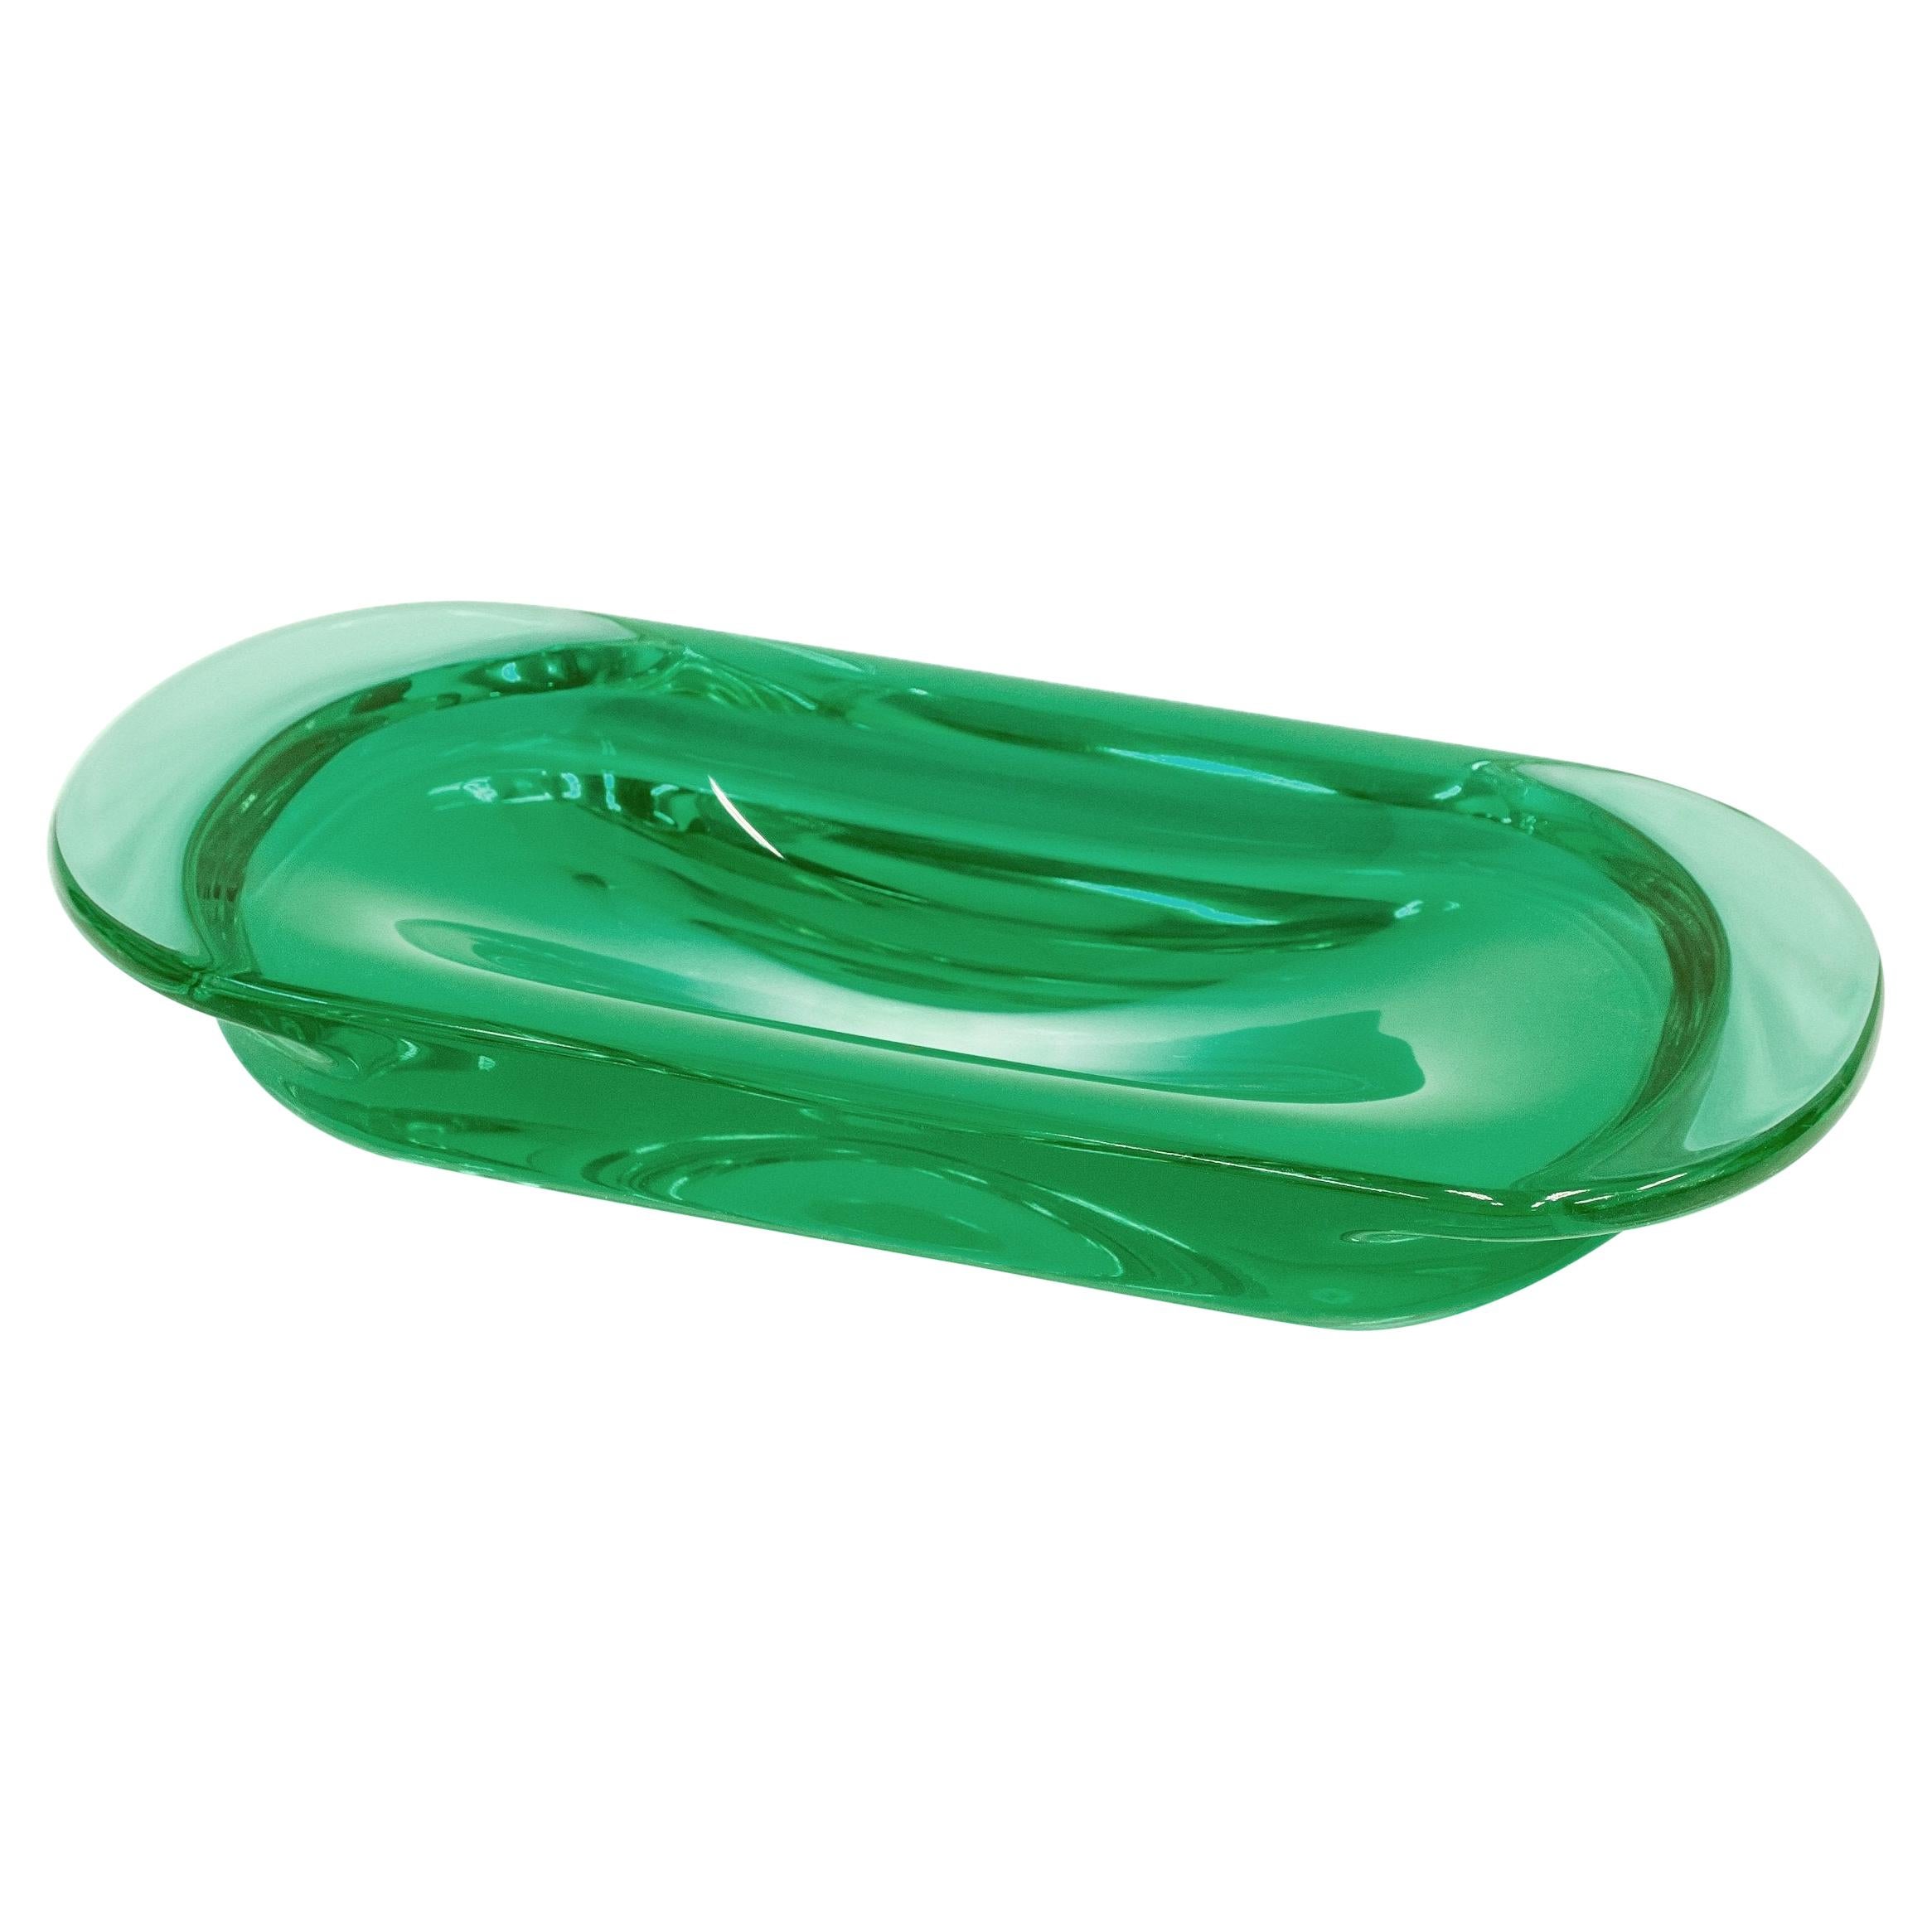 Resin Plump Trinket Dish - Green, Represented by Tuleste Factory